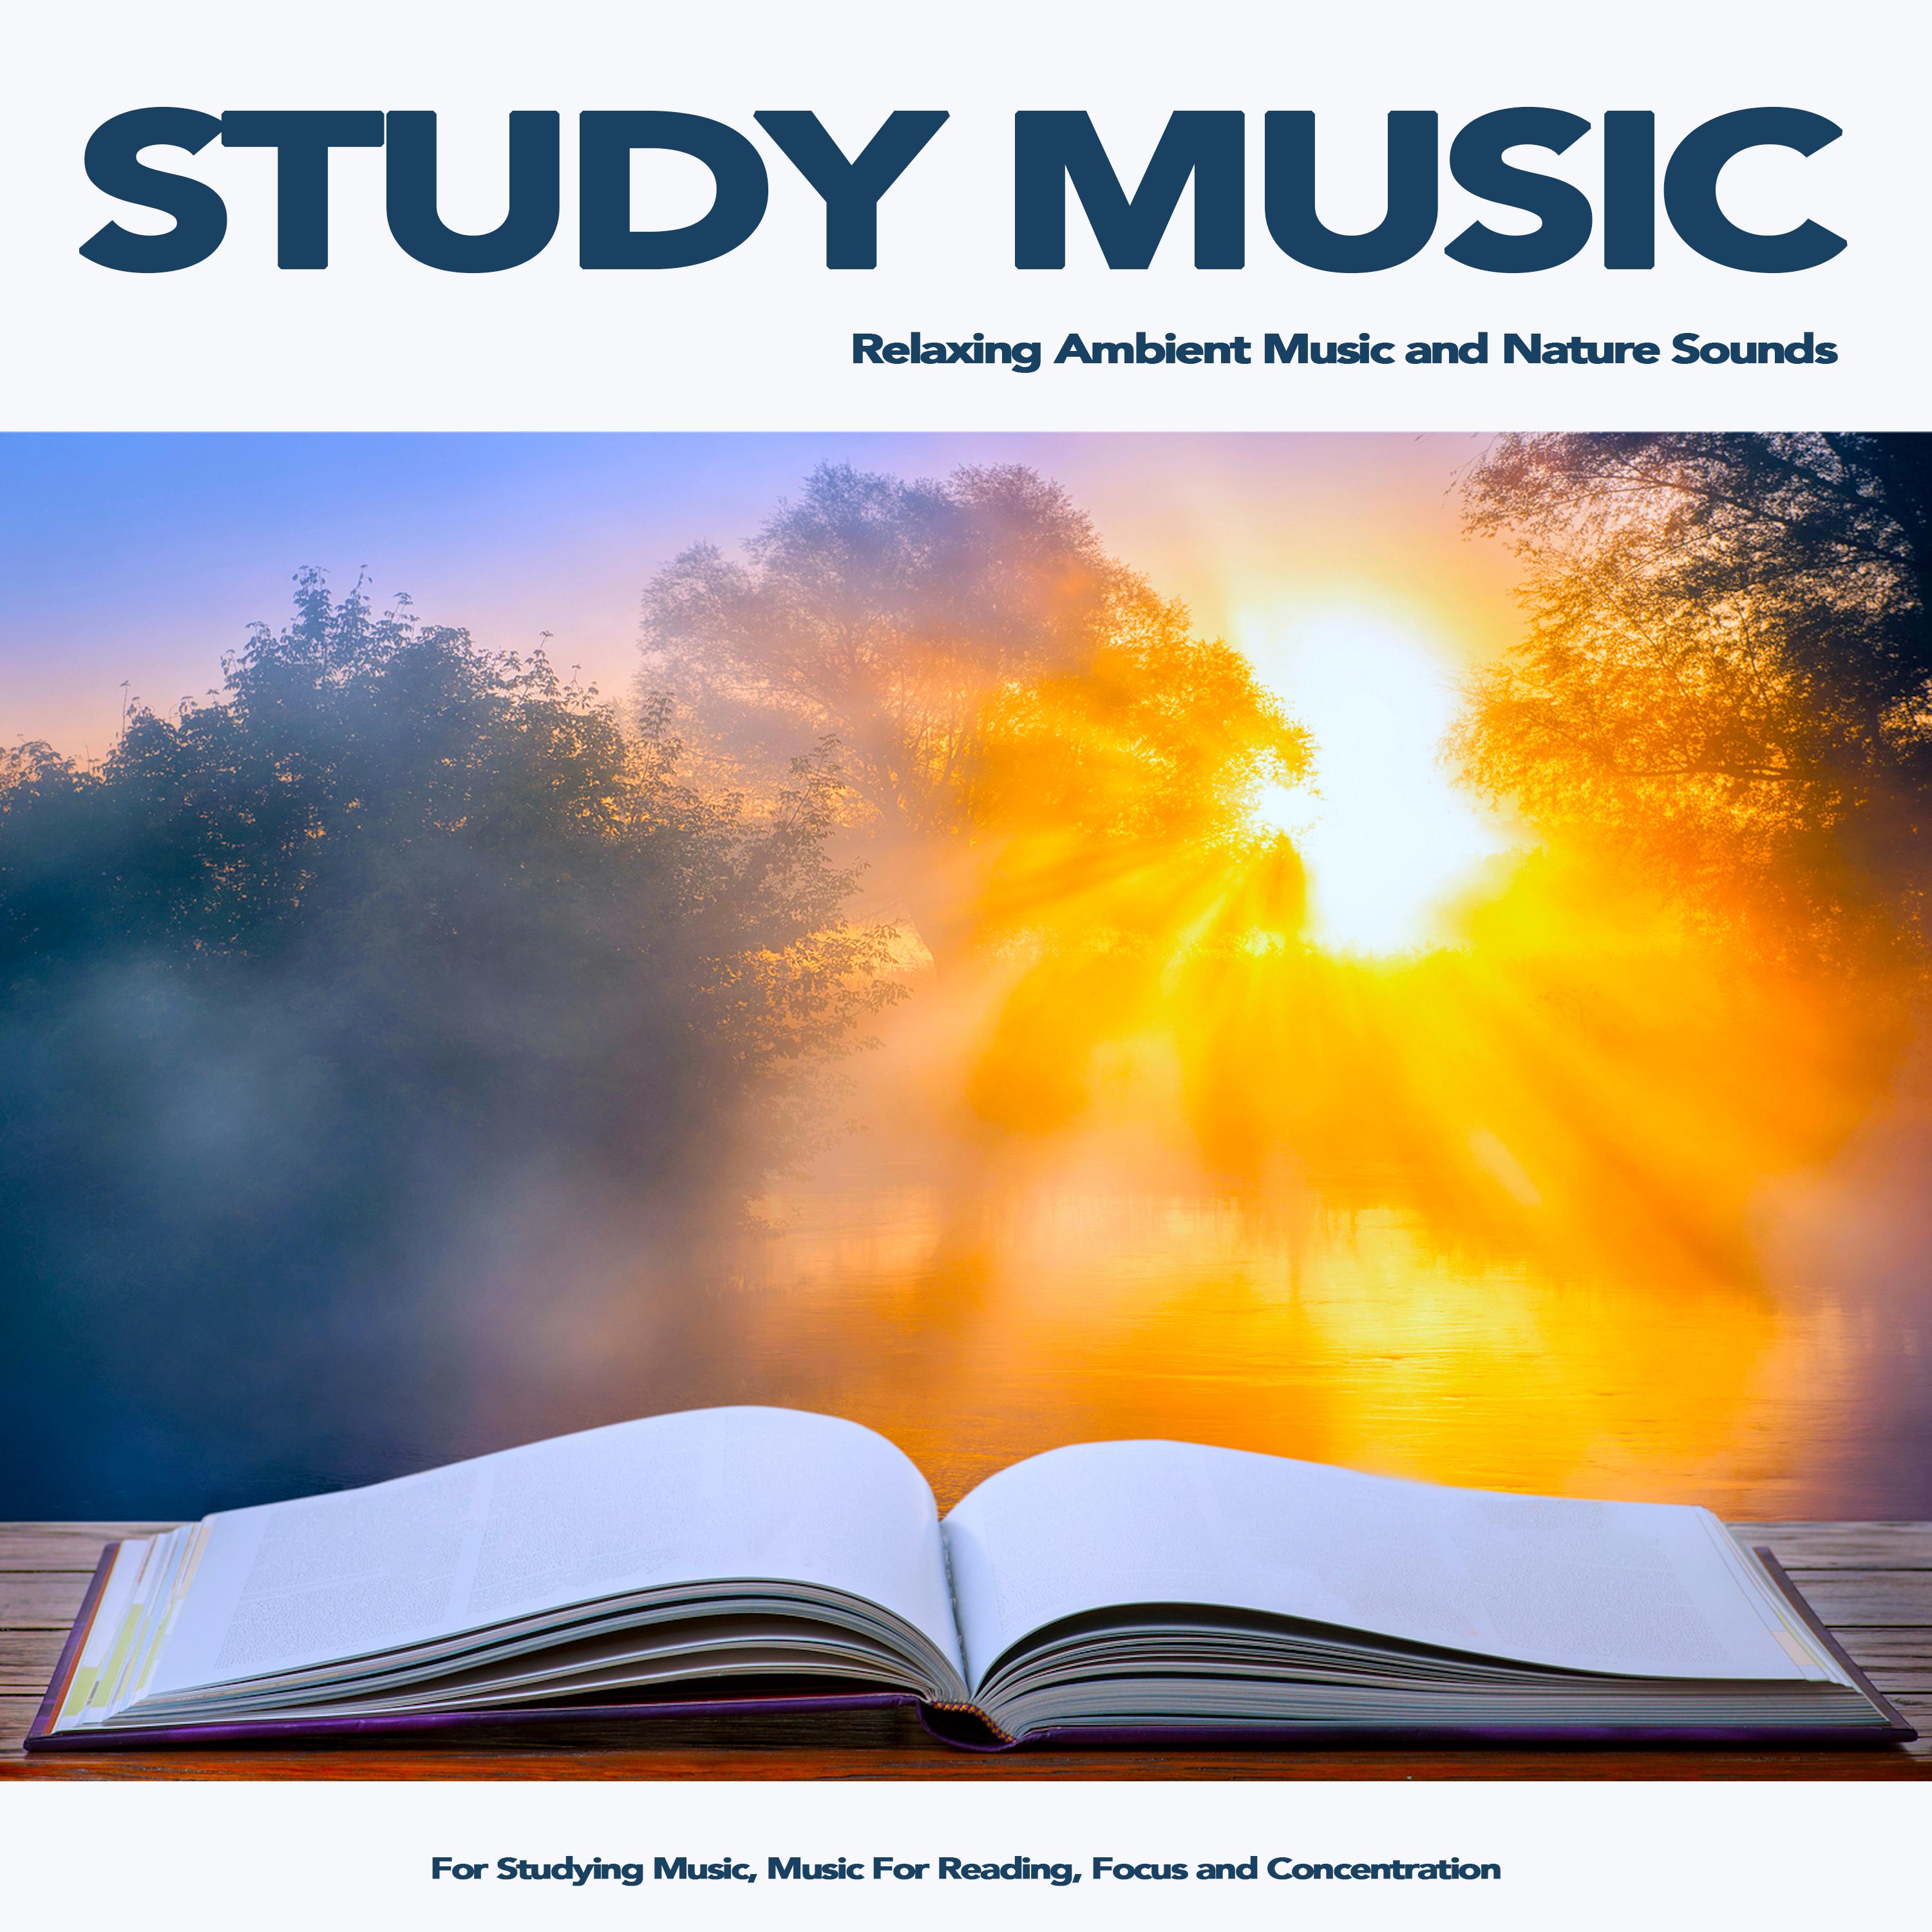 Sounds of Nature and Music For Studying